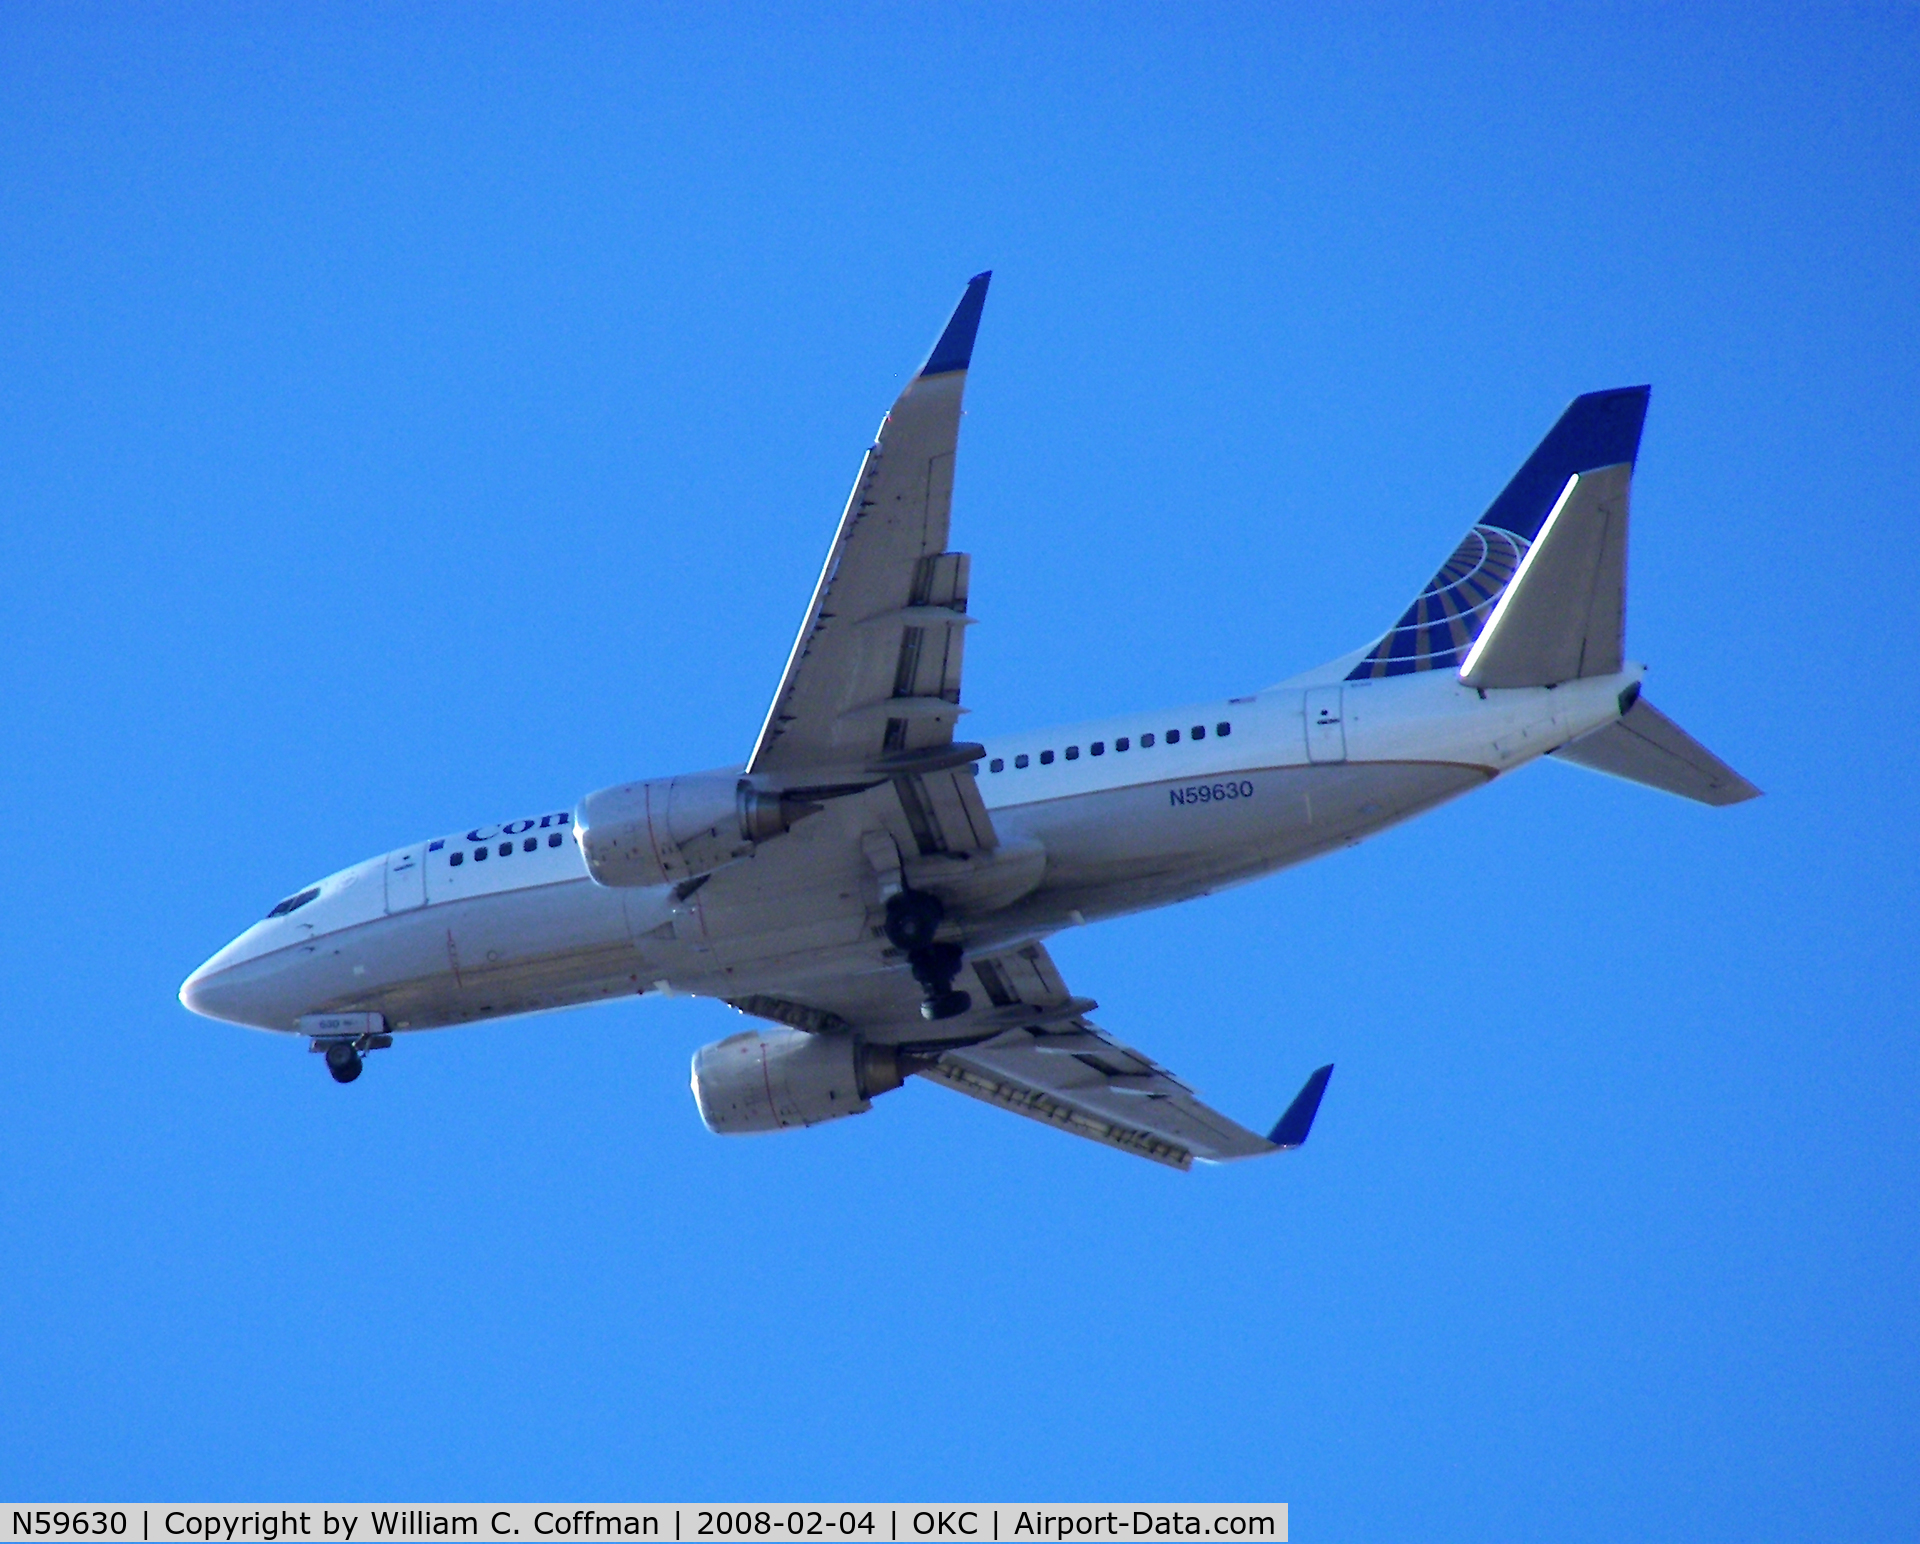 N59630, 1995 Boeing 737-524 C/N 27534, Getting ready to land at Will Rogers World Airport